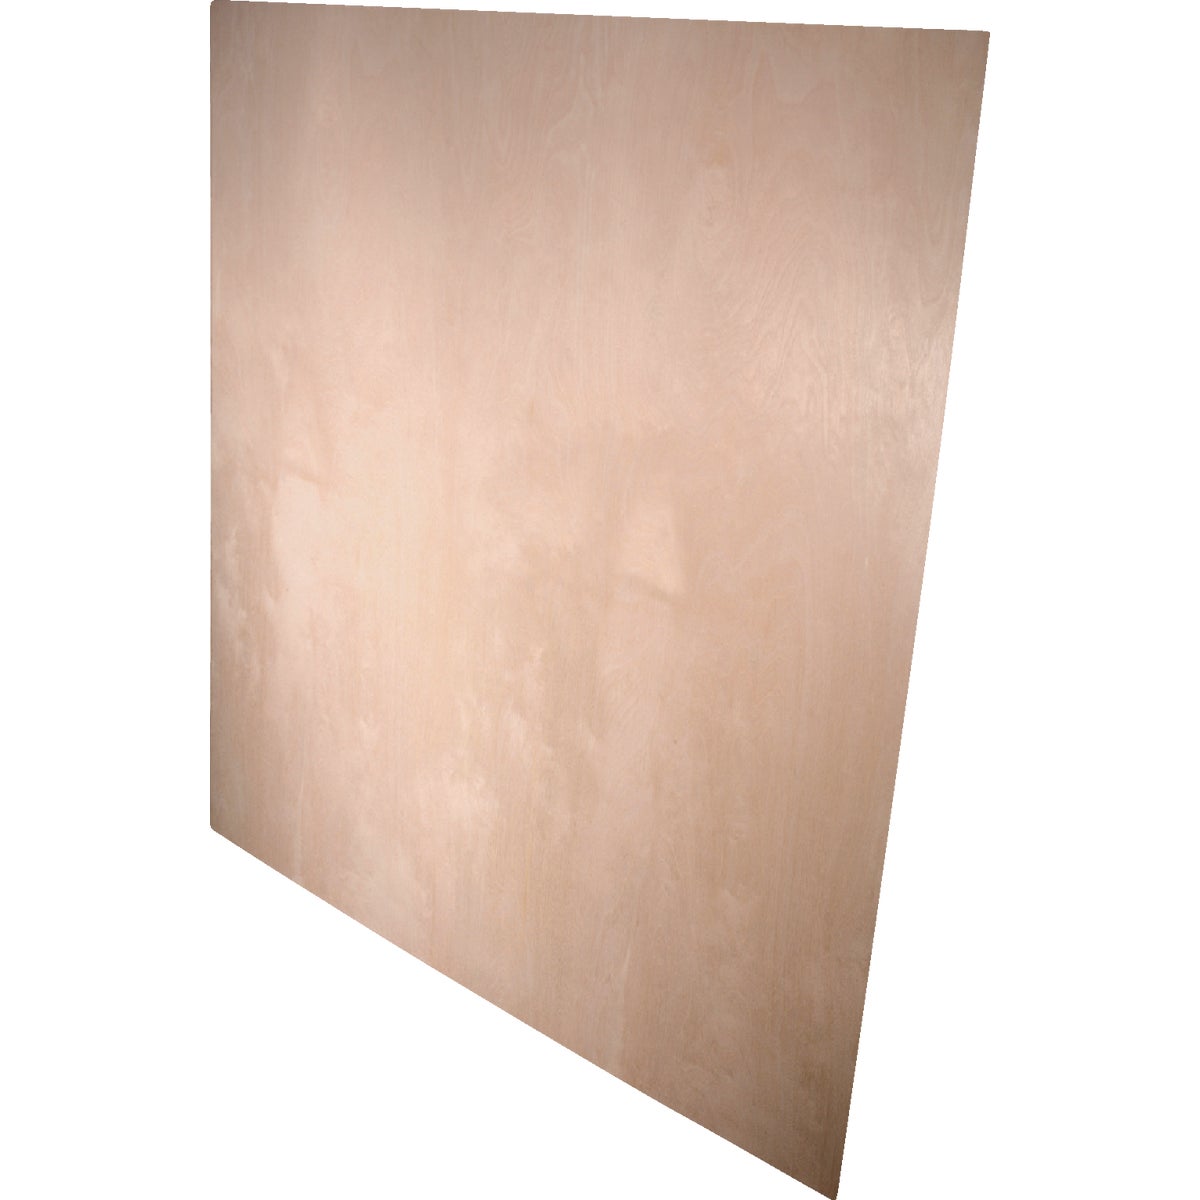 Alexandria Moulding 1/4 In. x 48 In. x 48 In. Pine Plywood